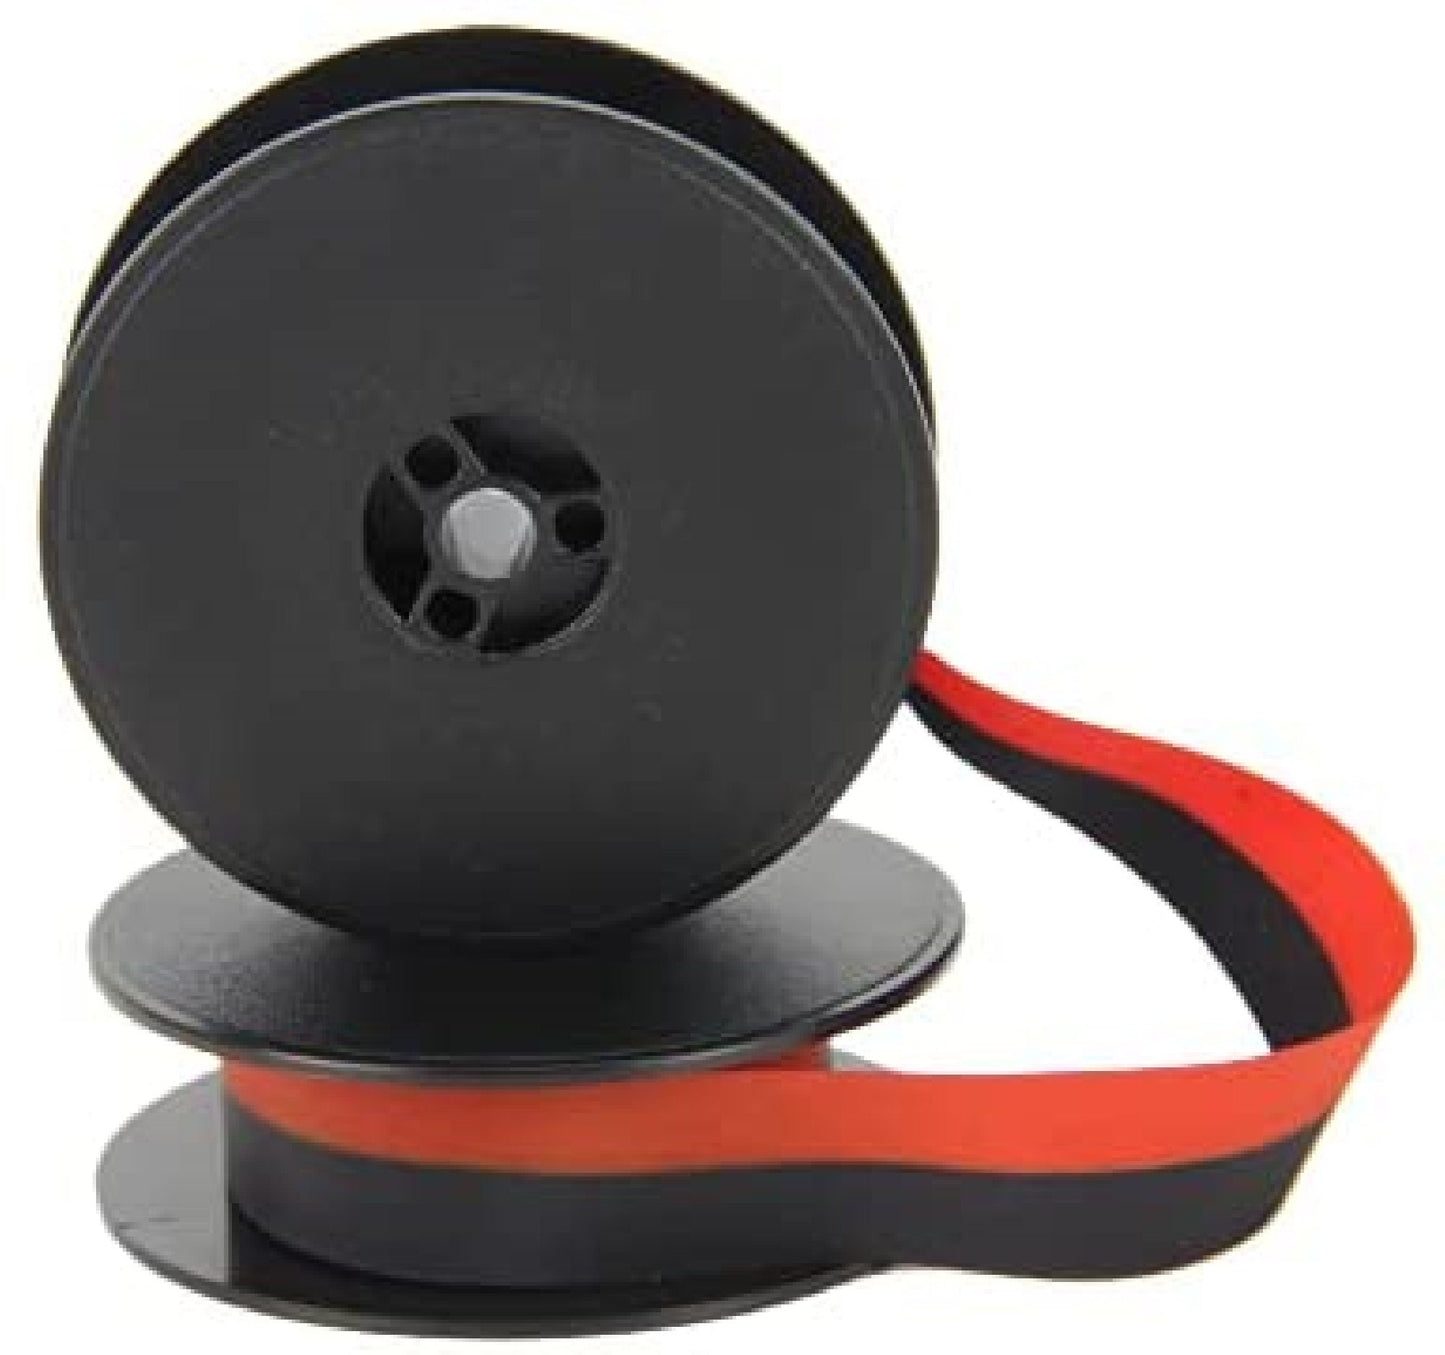 Olympia SM3 Typewriter Ribbon - High-Quality Replacement Ink Ribbon - Compatible with Olympia SM3 Models